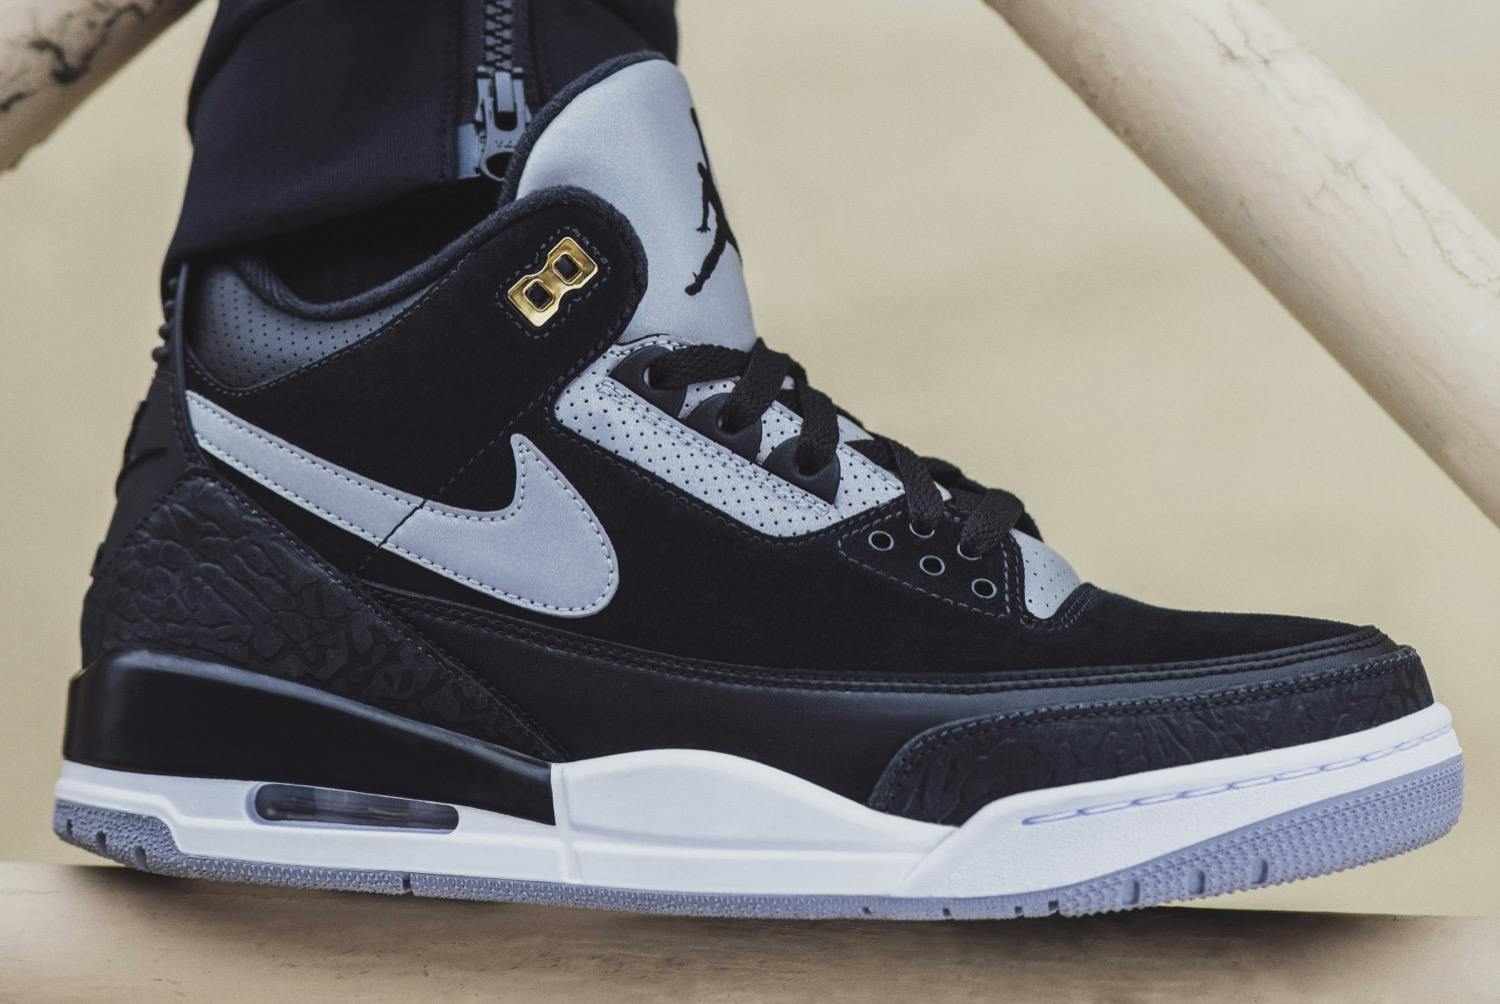 Nike Air Jordan 3 Retro TH - Register Now on END. Launches | END.